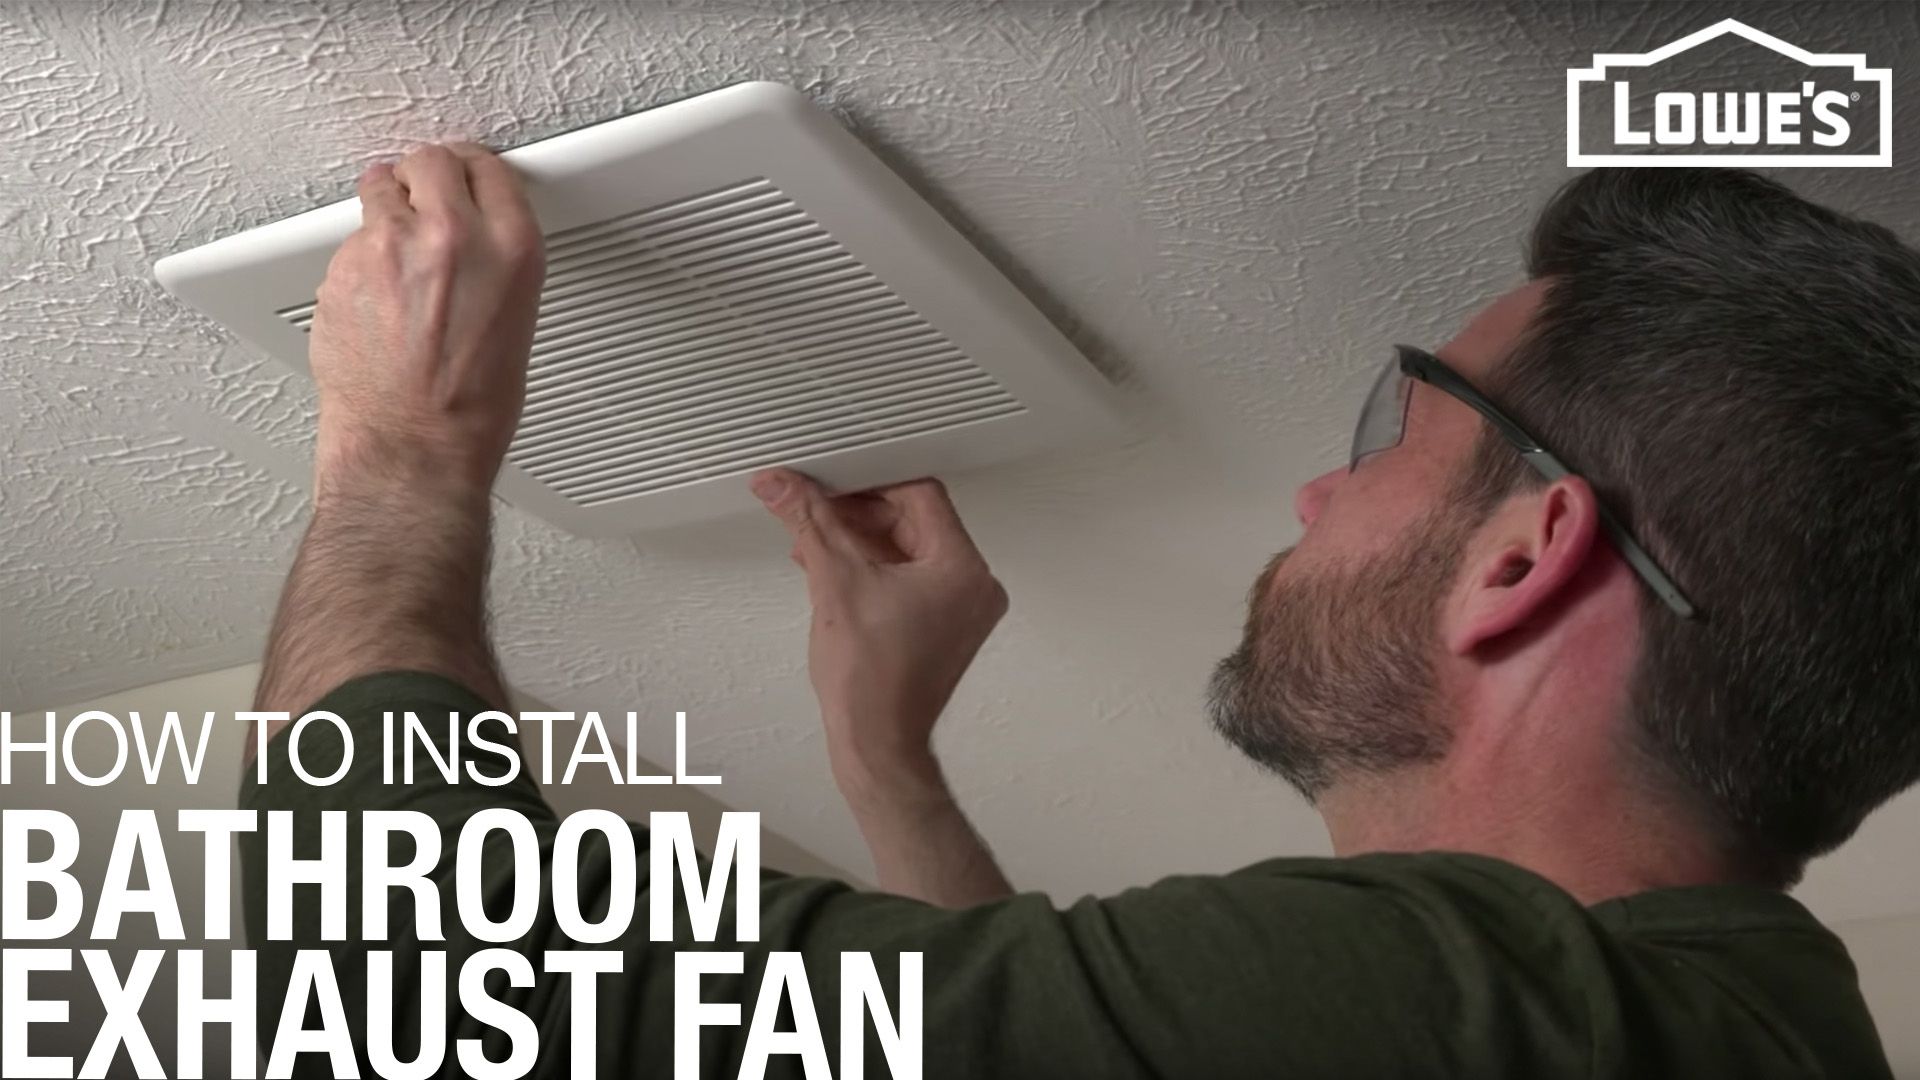 How To Install A Bathroom Exhaust Fan, How To Fix Bathroom Ventilation Fans